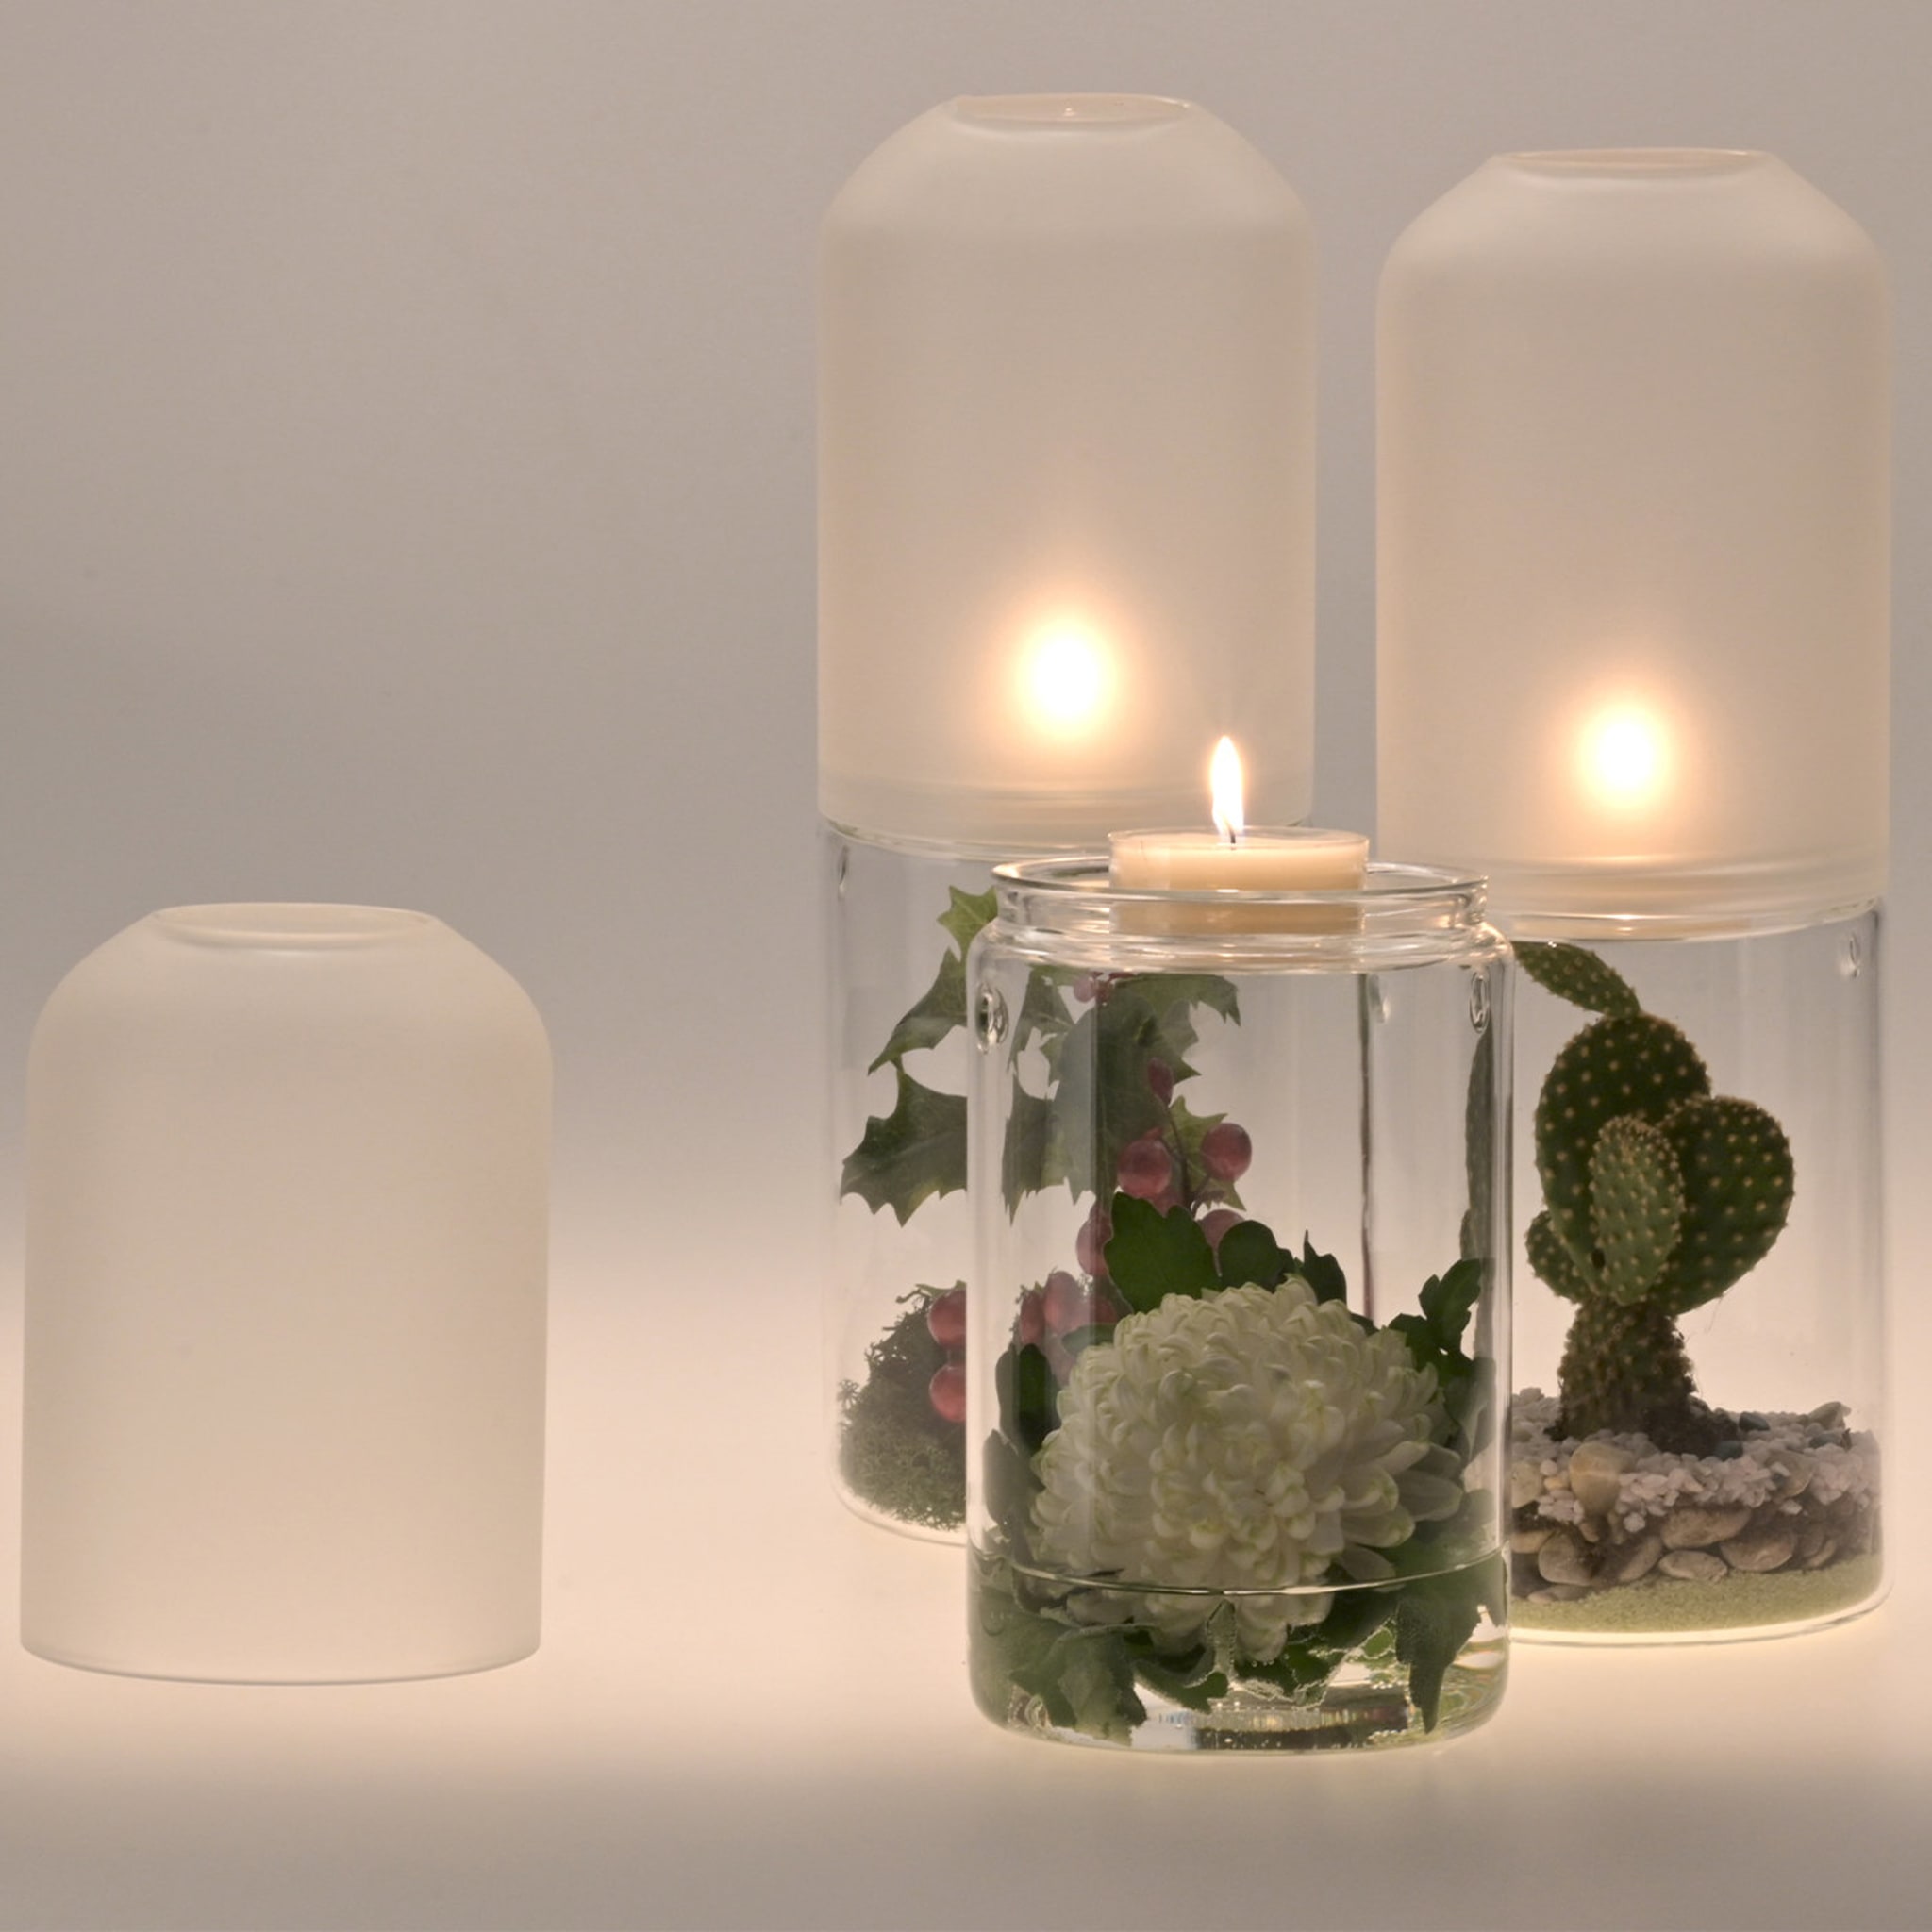 2-in-1 Candleholder - Alternative view 3